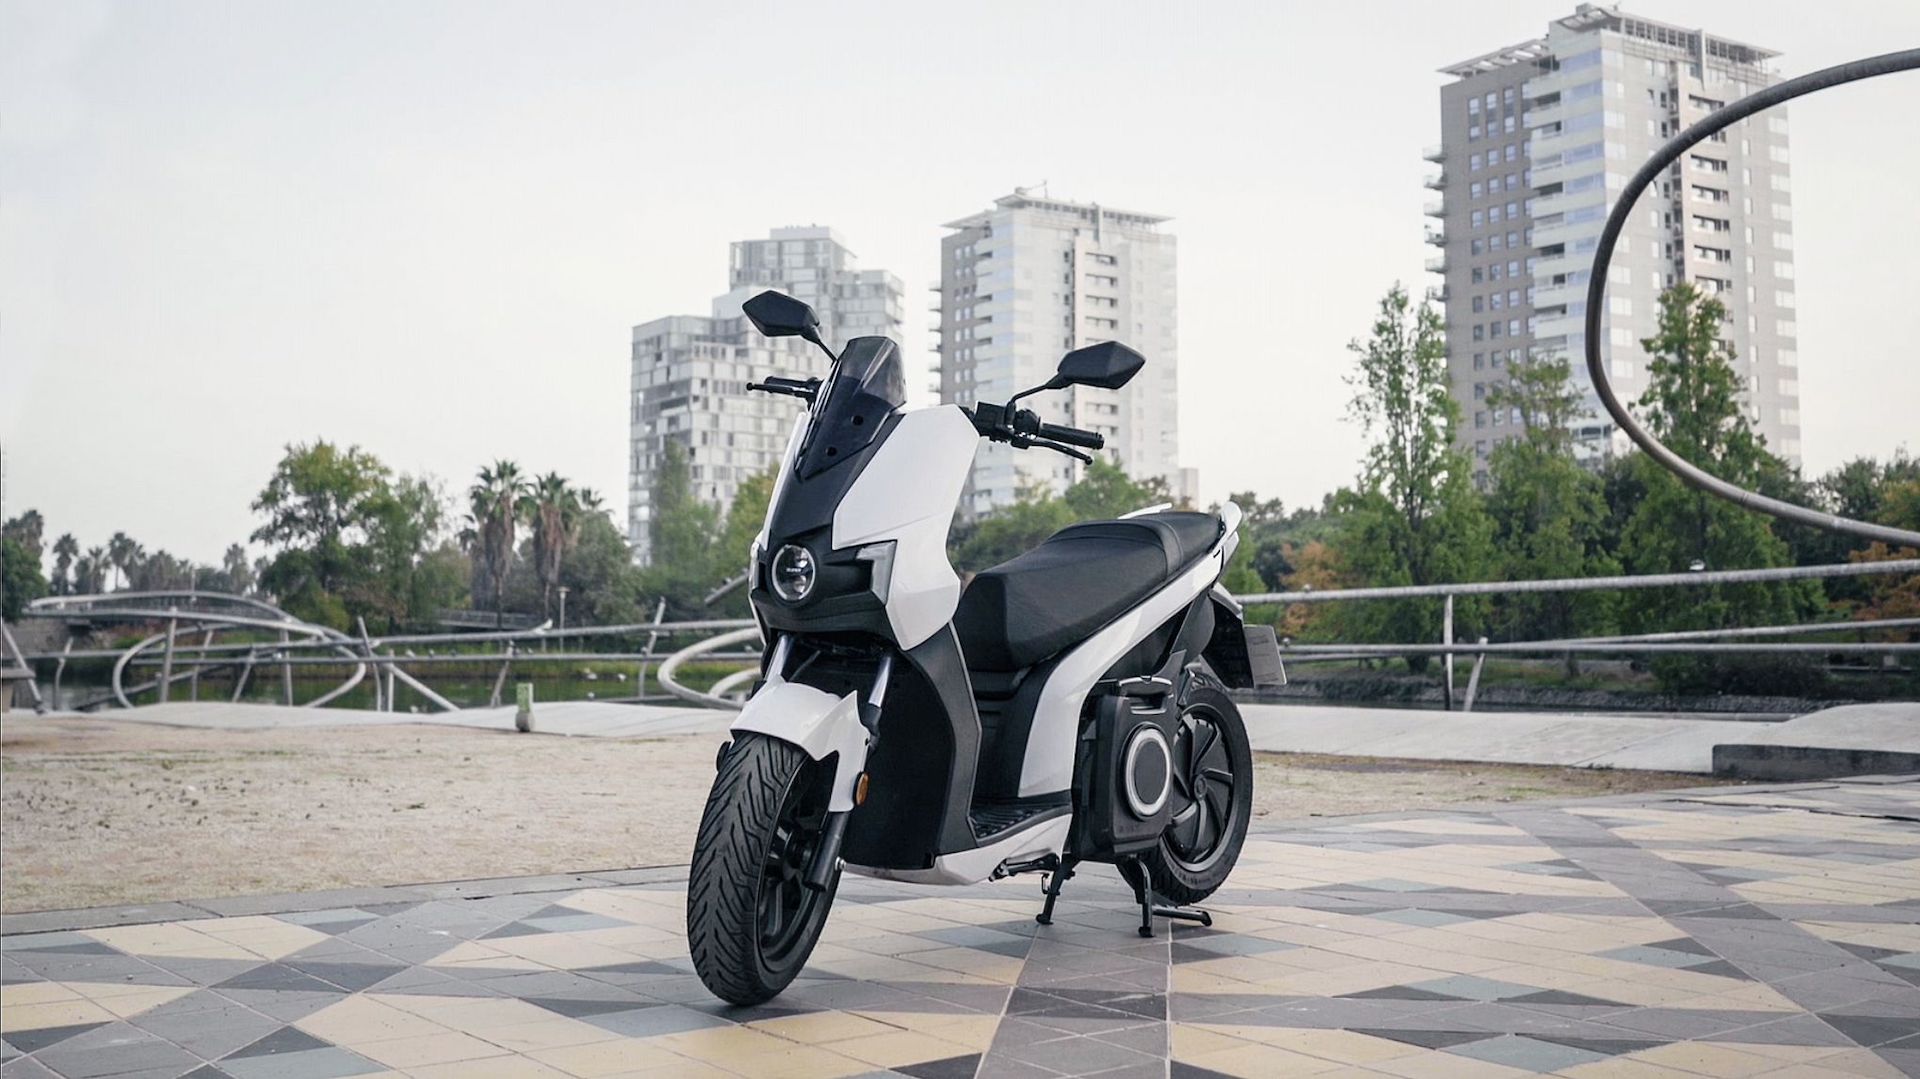 How to charge an electric motorbike